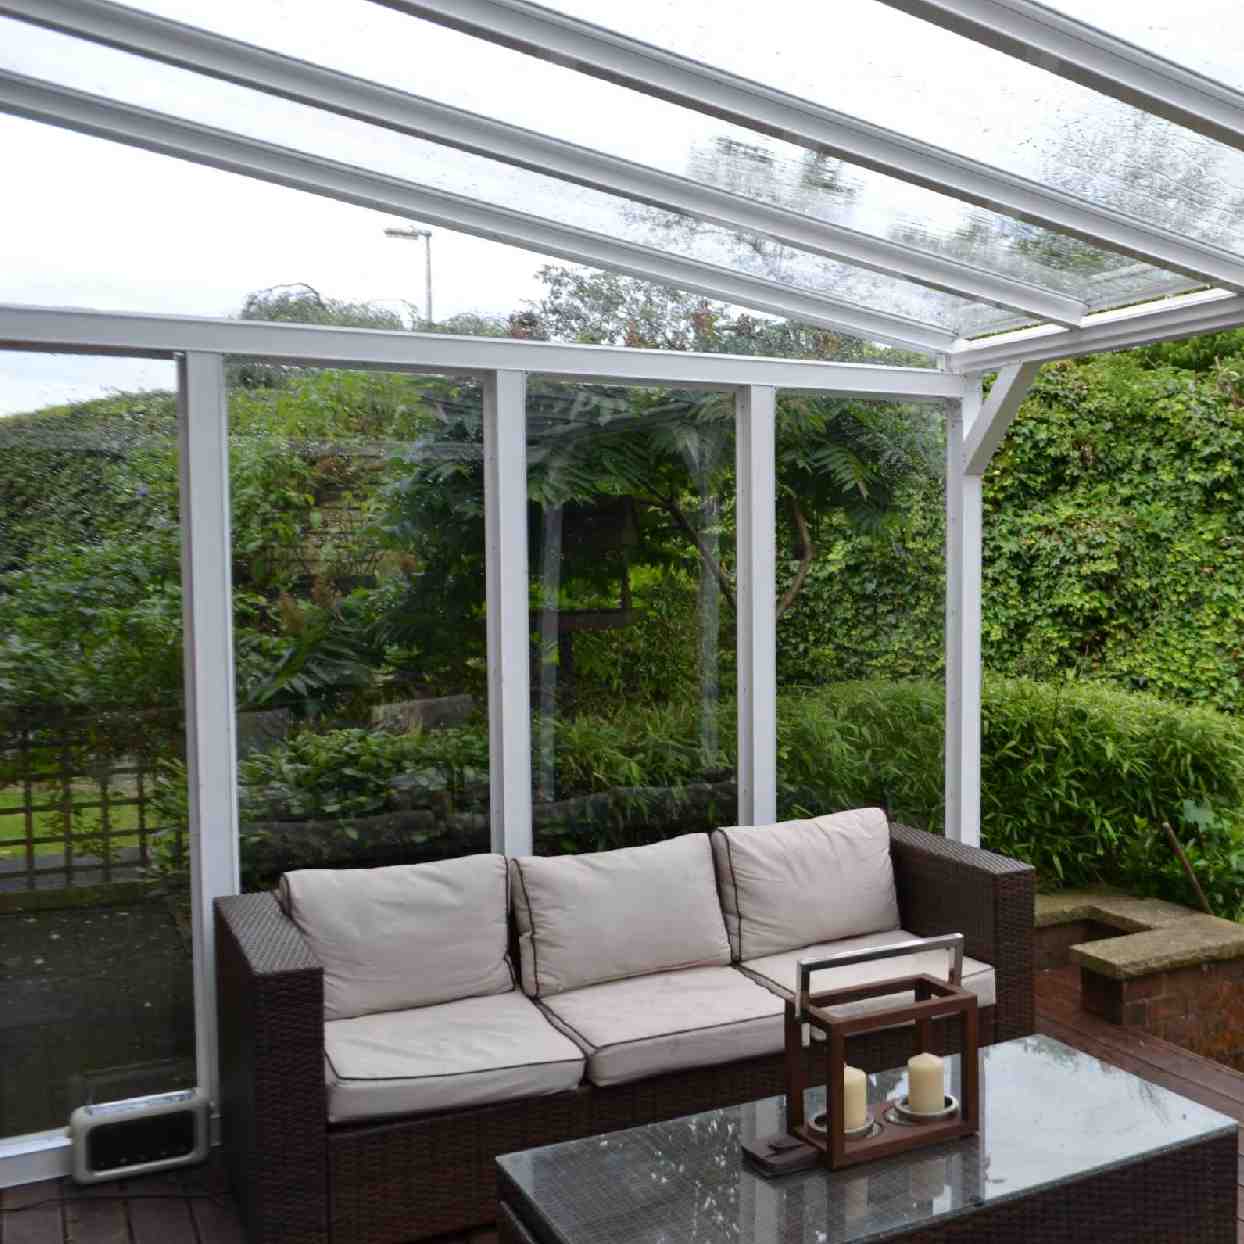 Buy Omega Verandah White with 16mm Polycarbonate Glazing - 6.0m (W) x 4.5m (P), (3) Supporting Posts online today